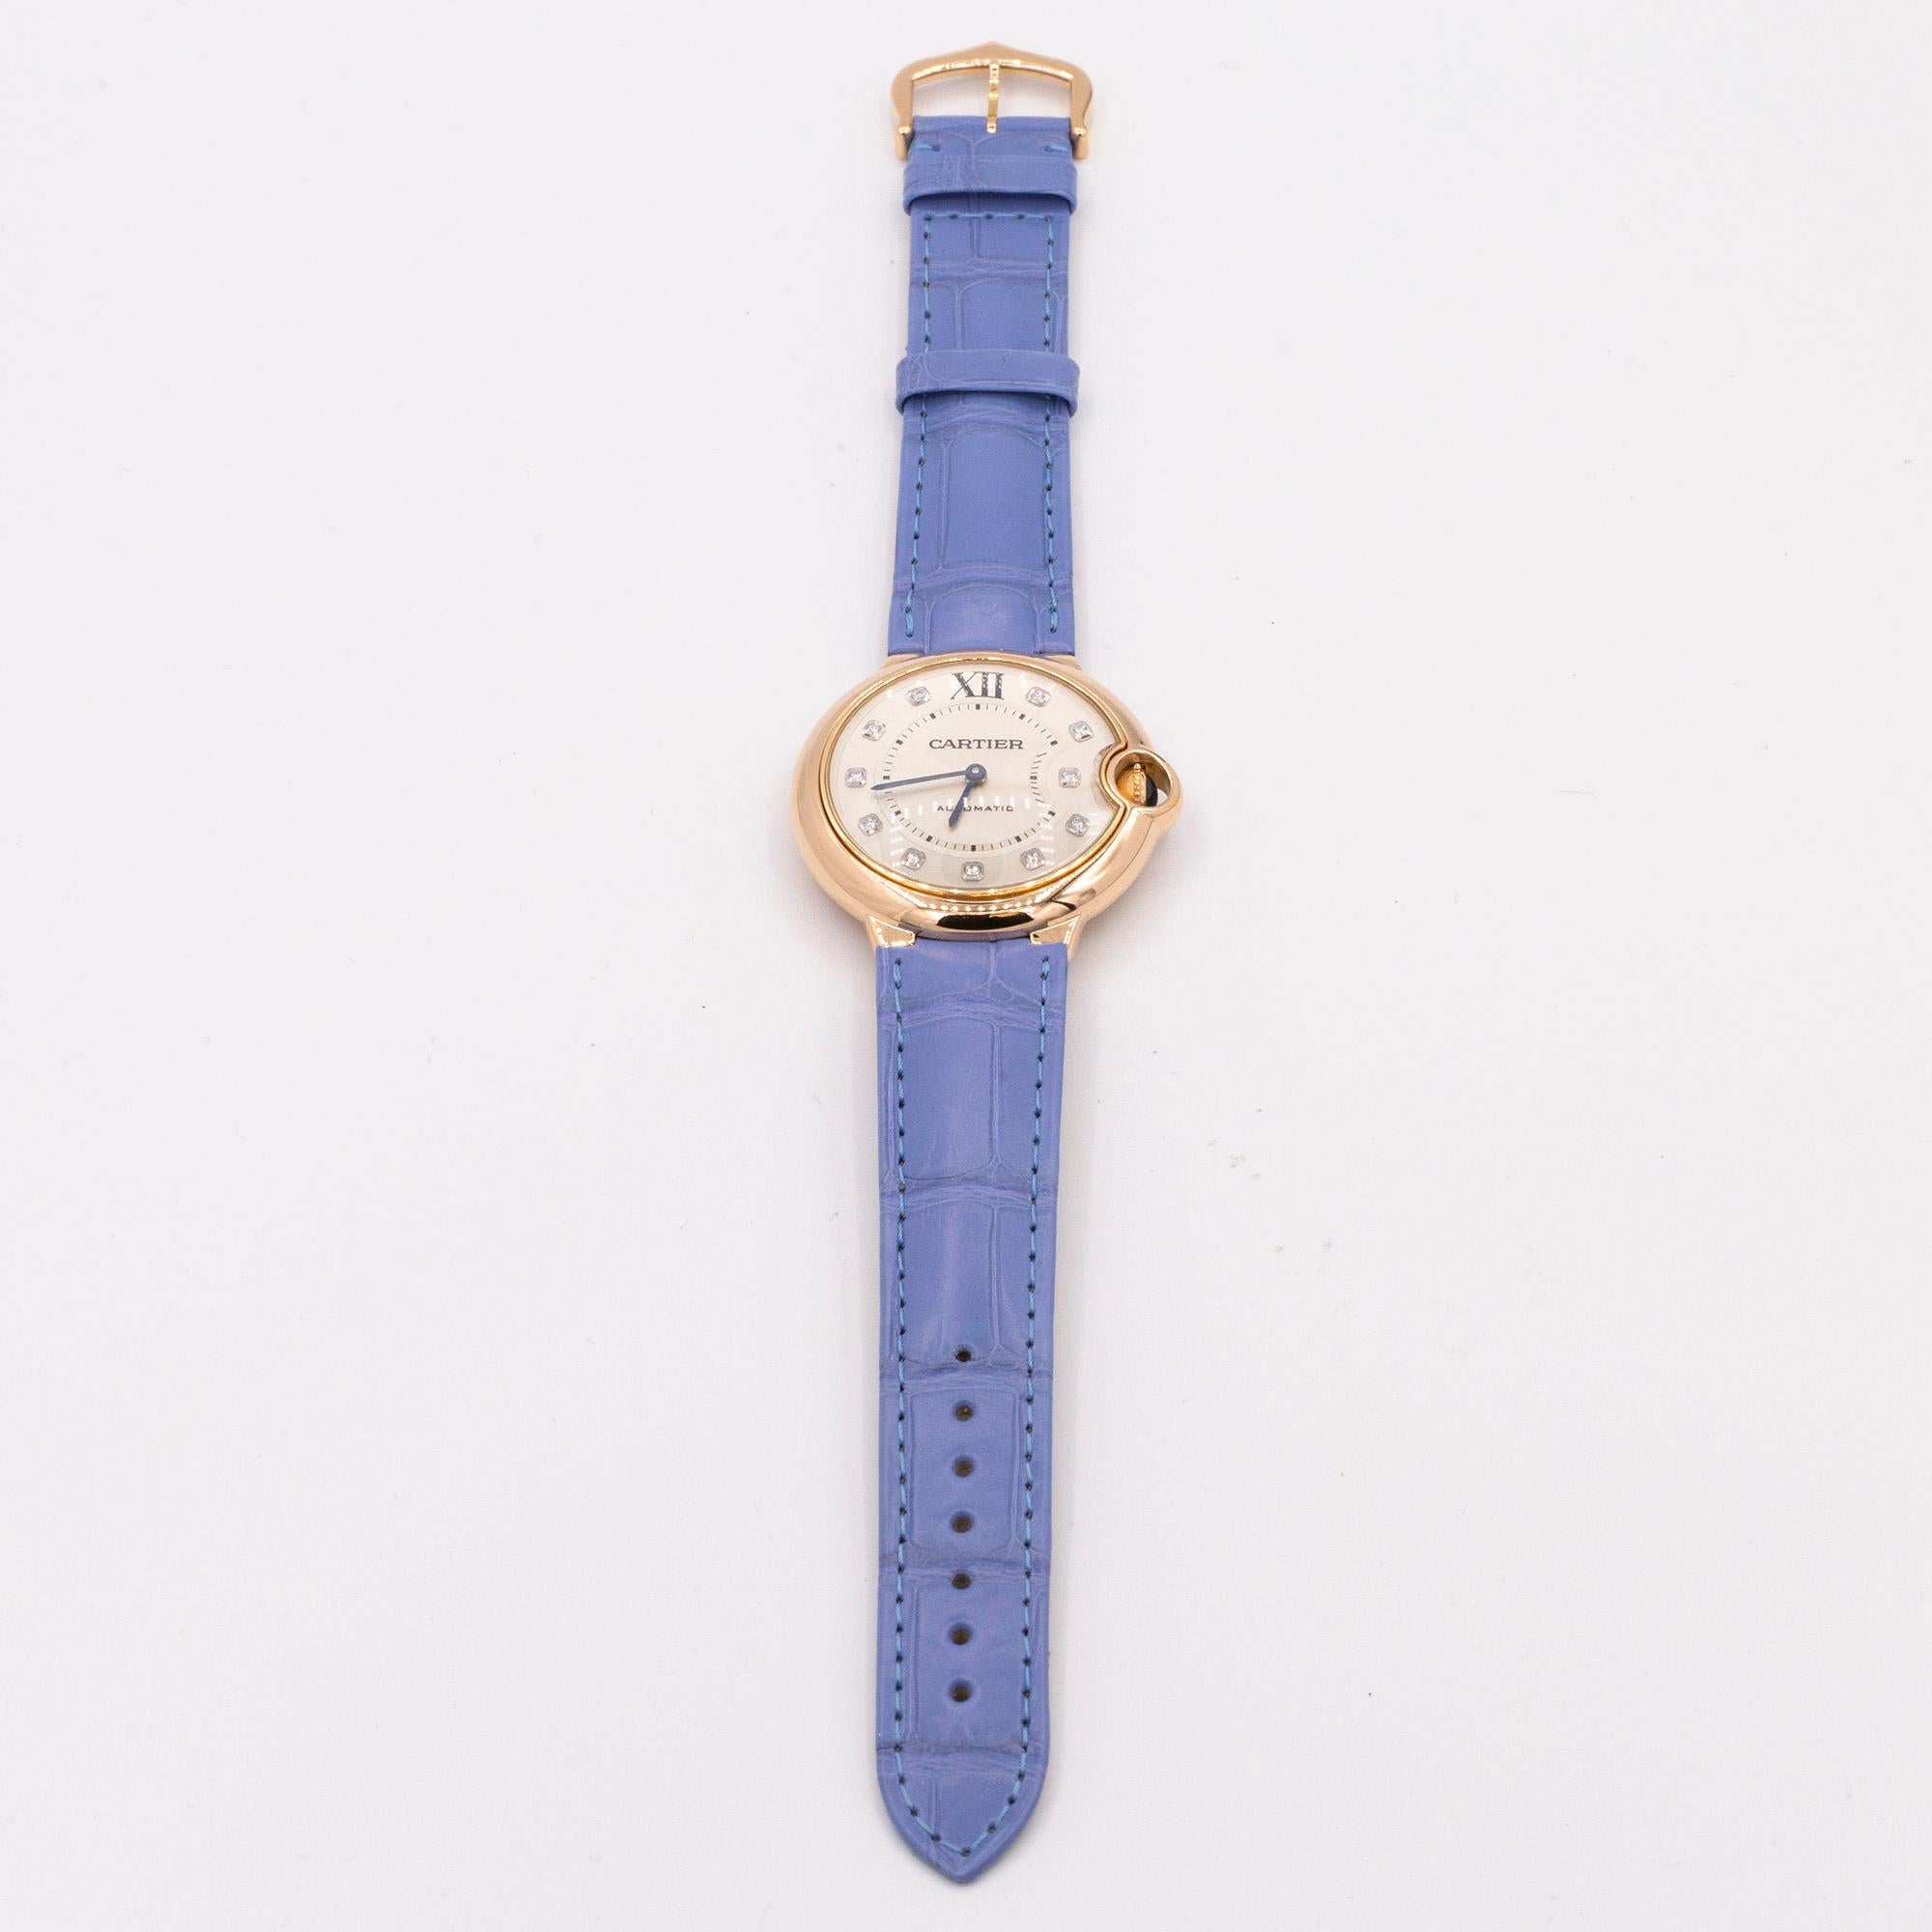 Vintage 18K Rose gold Cartier Ballon Bleu watch. 36mm case. The watch has an automatic
movement, diamond markers and a genuine Cartier strap. 
Model # WSBB0010( OLD#WE902028)
Serial #3003460051VX .
Box and Papers are included.